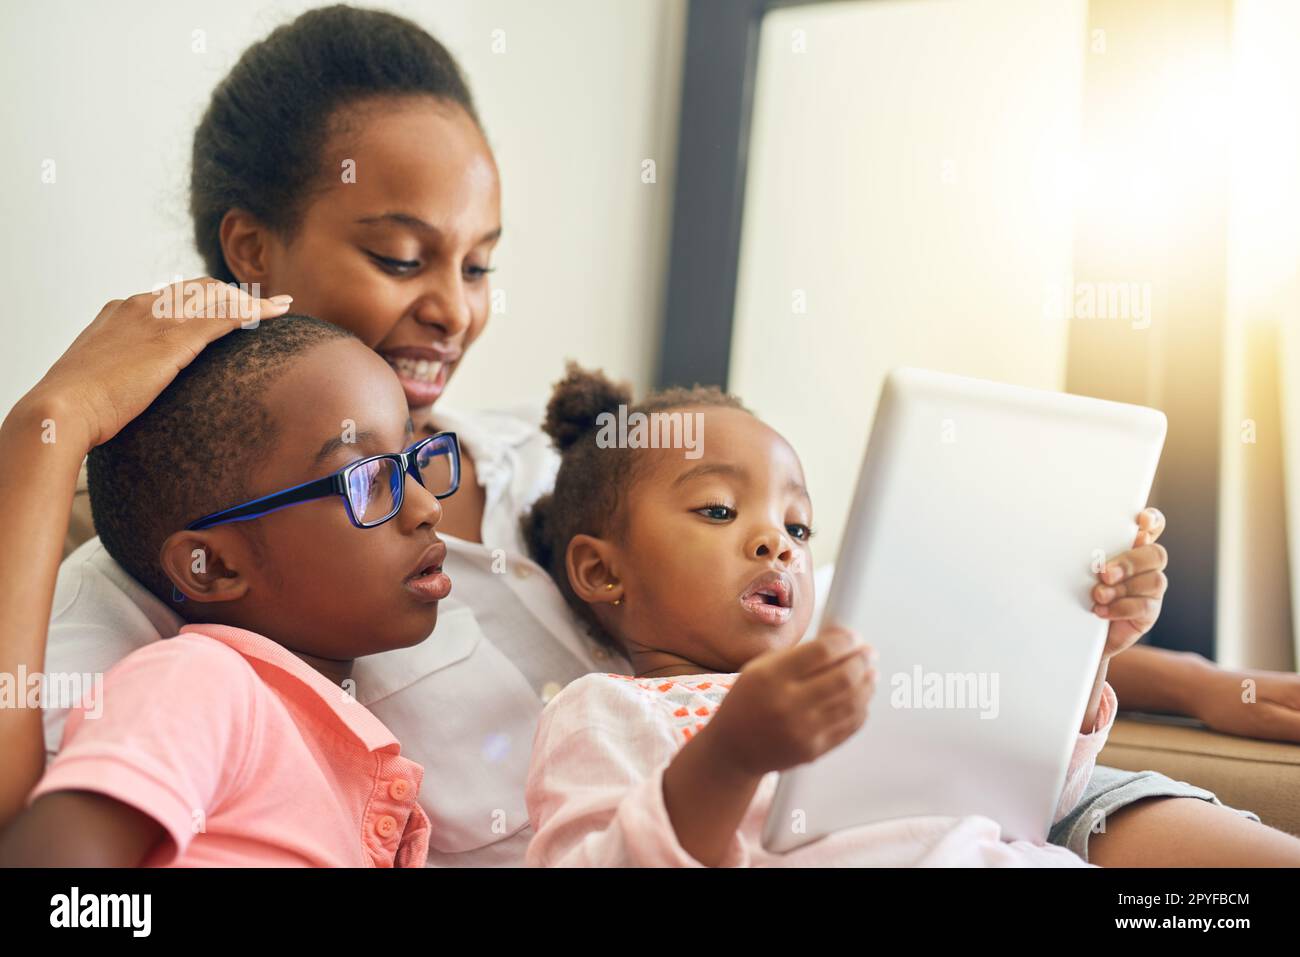 Some family down time. an affectionate young family using a tablet together at home. Stock Photo